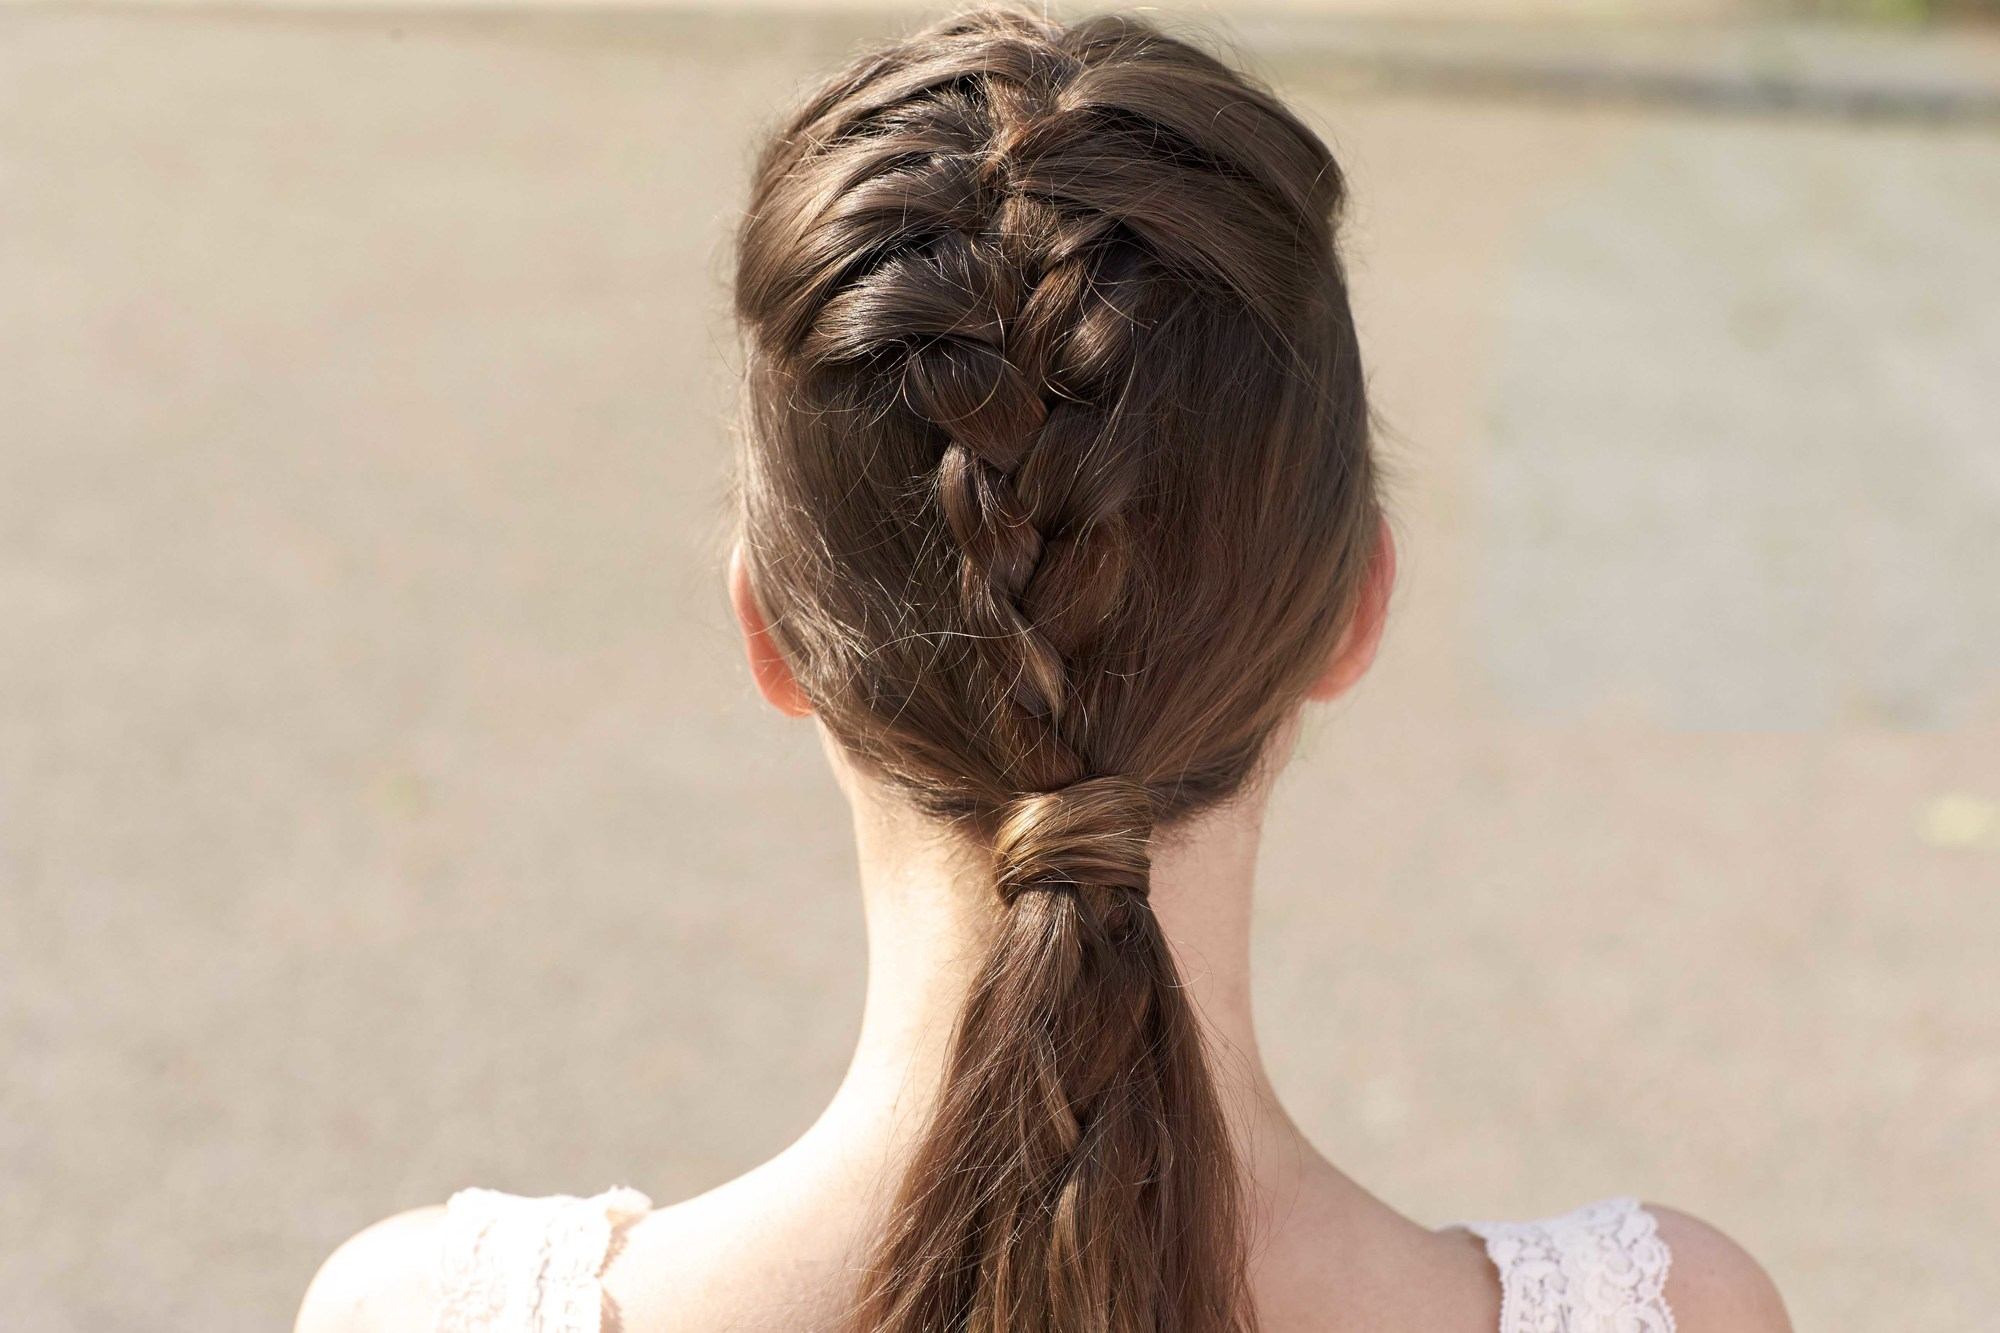 How To Do A Side French Braid Easy Tutorial With Pictures